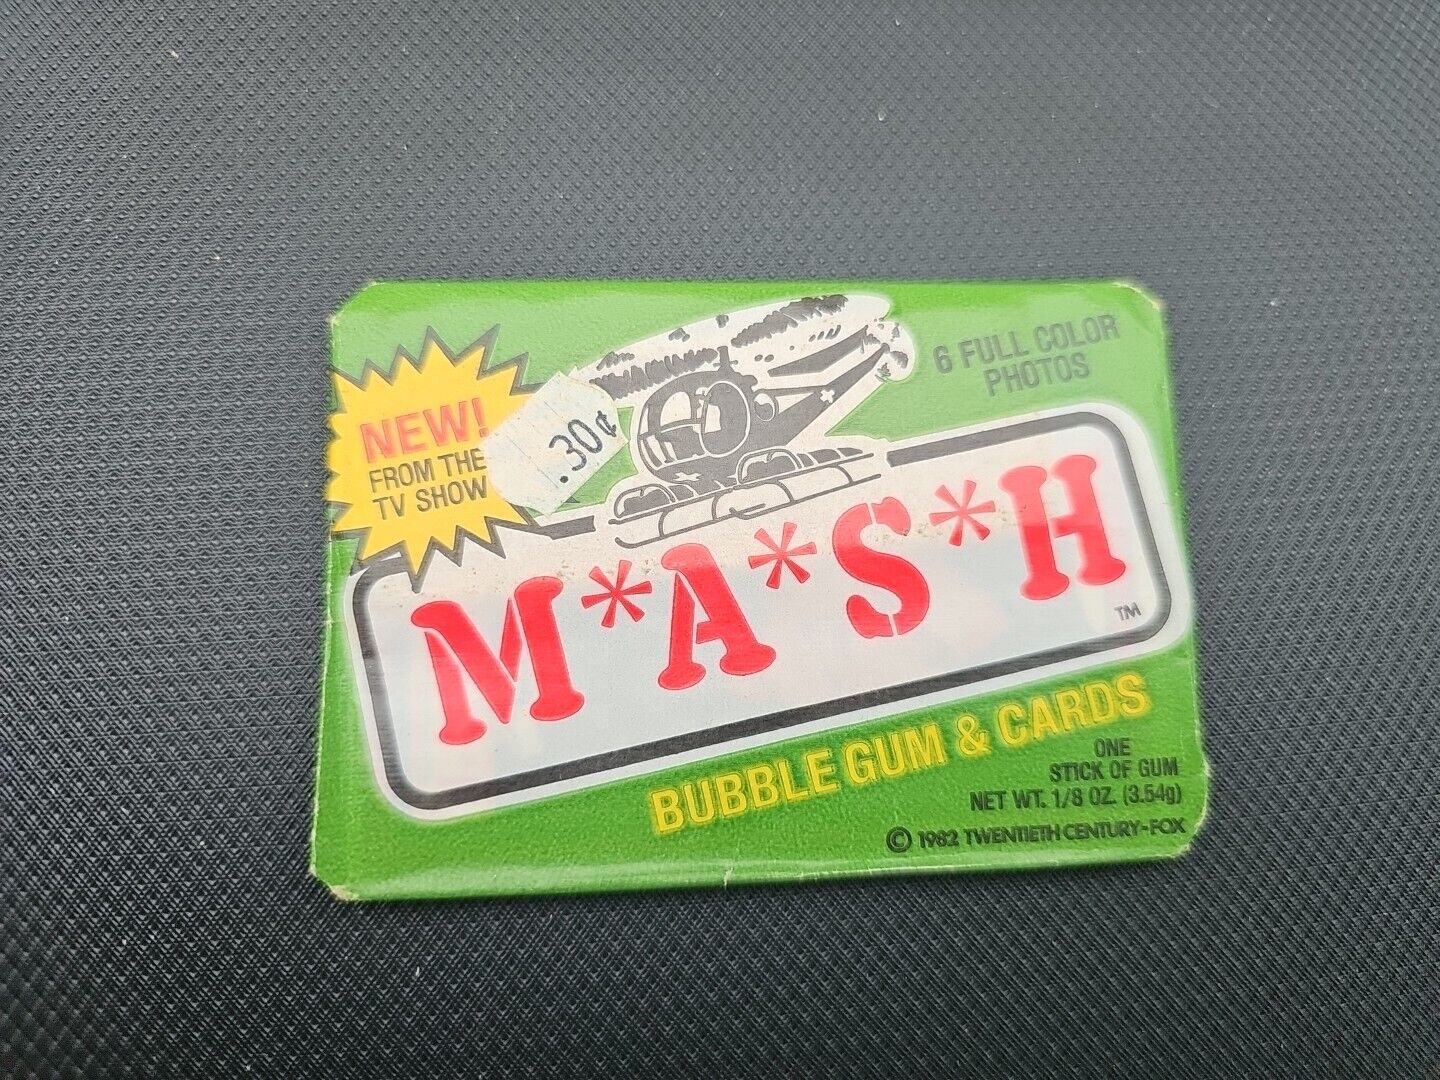 M*A*S*H  Sealed Wax Packs With Gum Donruss 1982 MASH TV Show